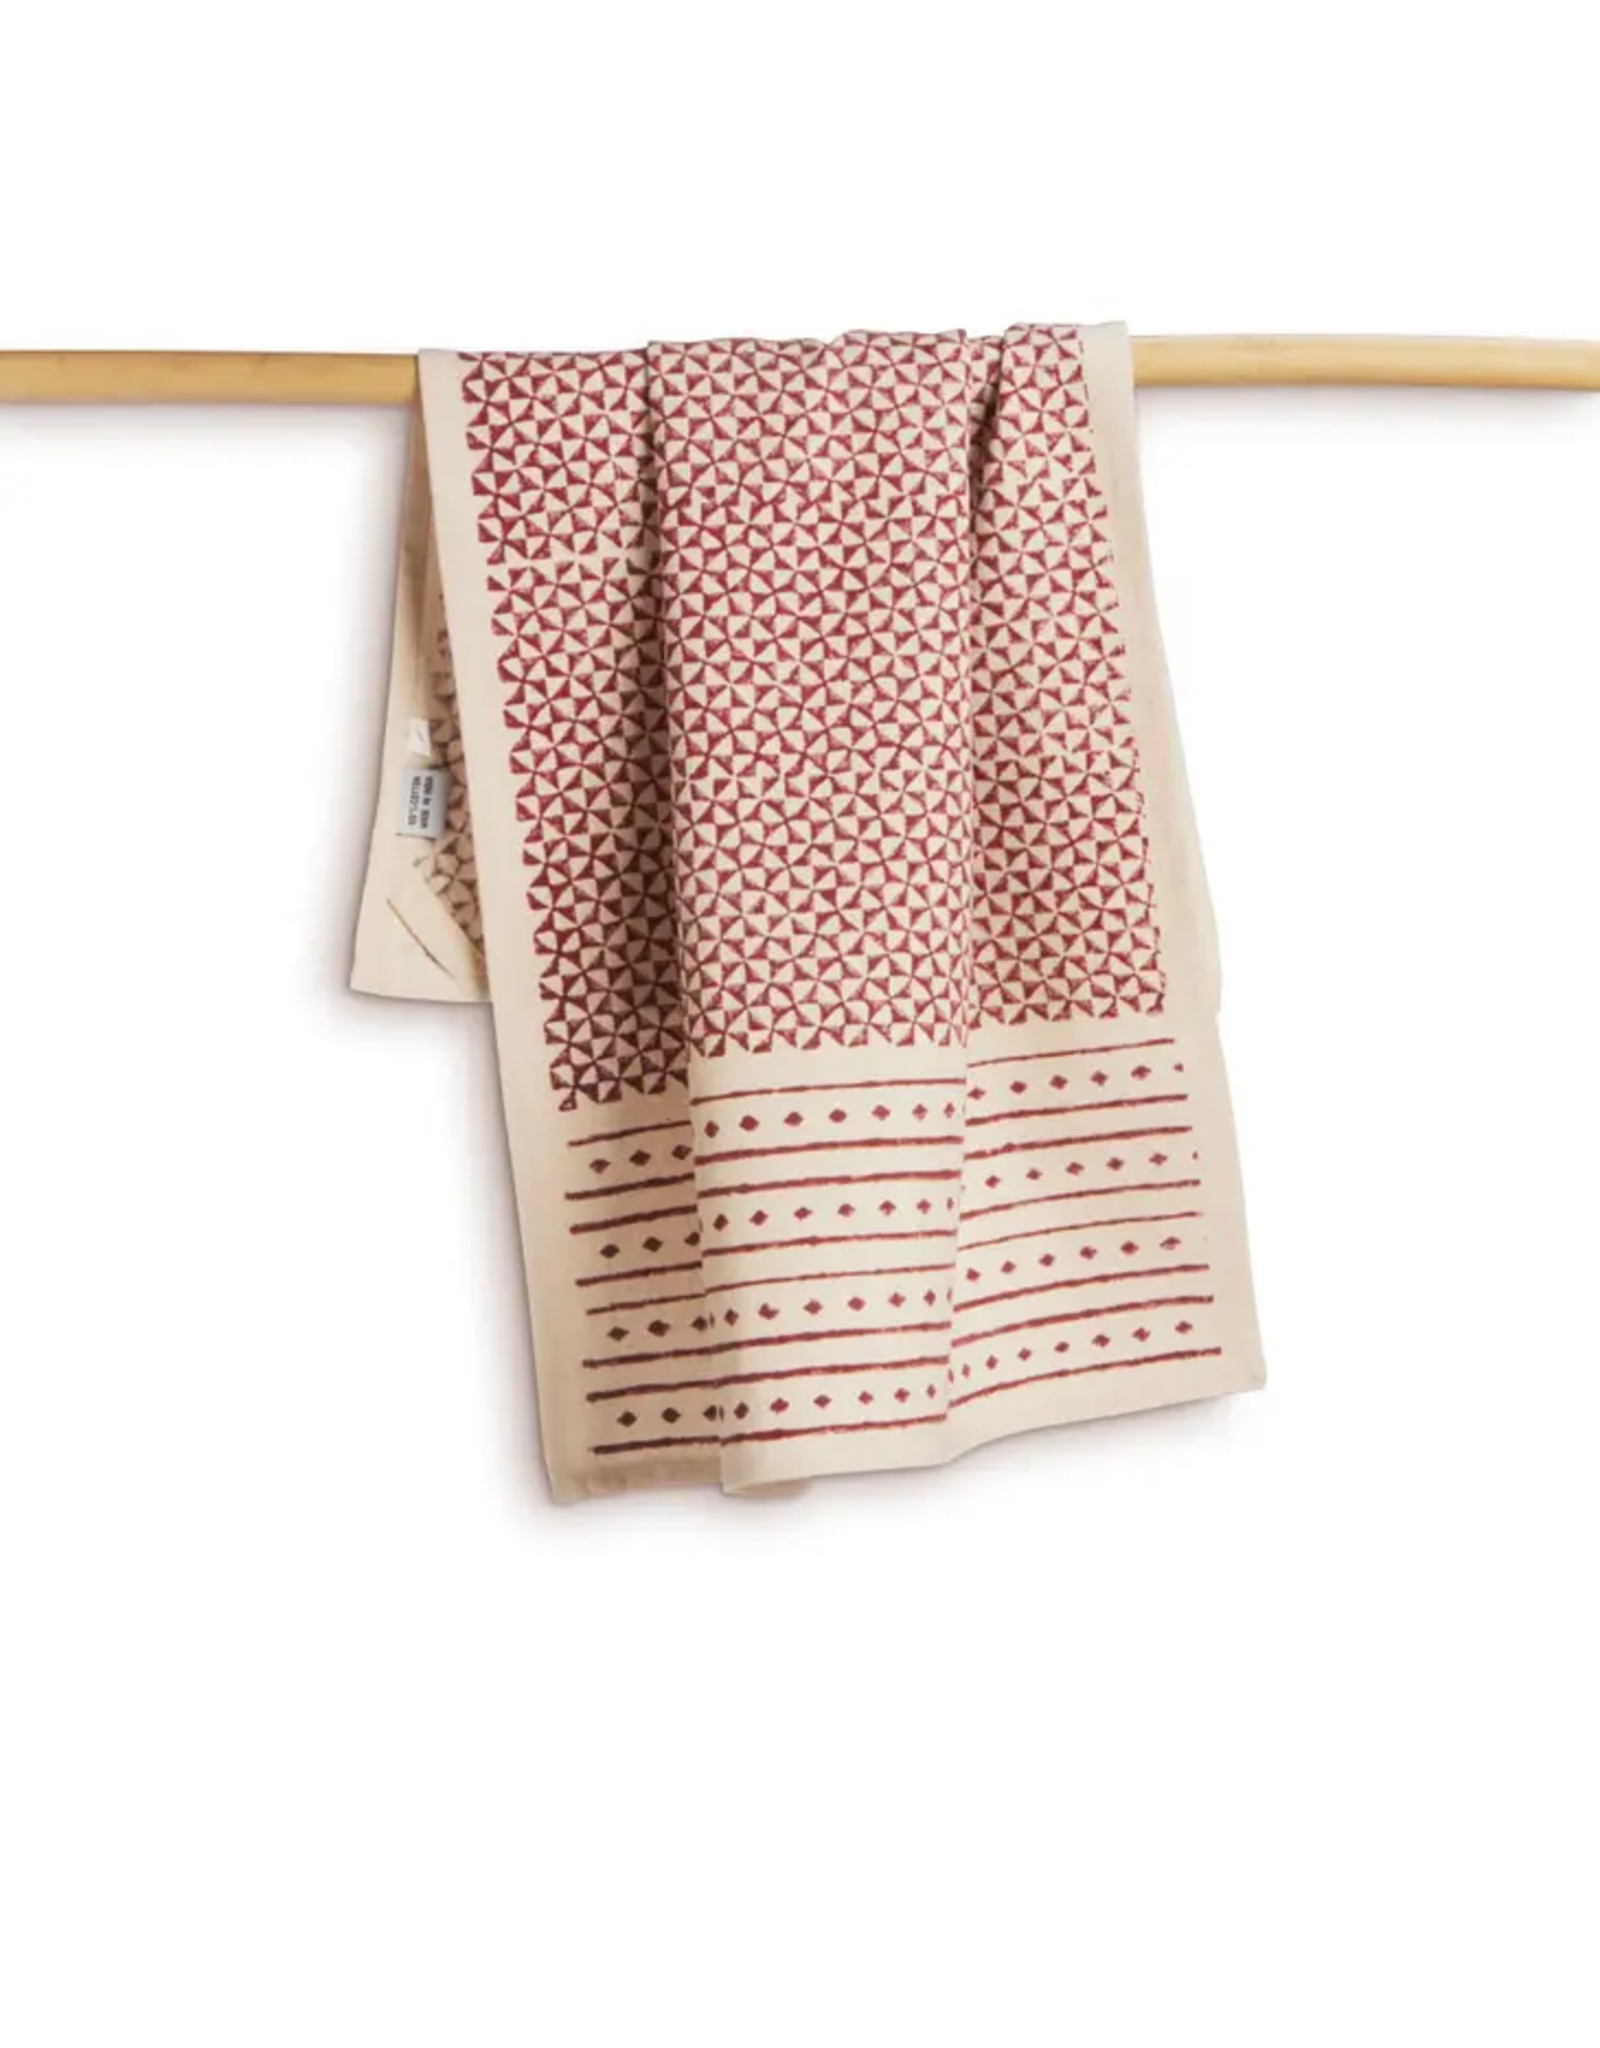 Trade roots Bungaloo, 100% Cotton Kitchen Towel, India